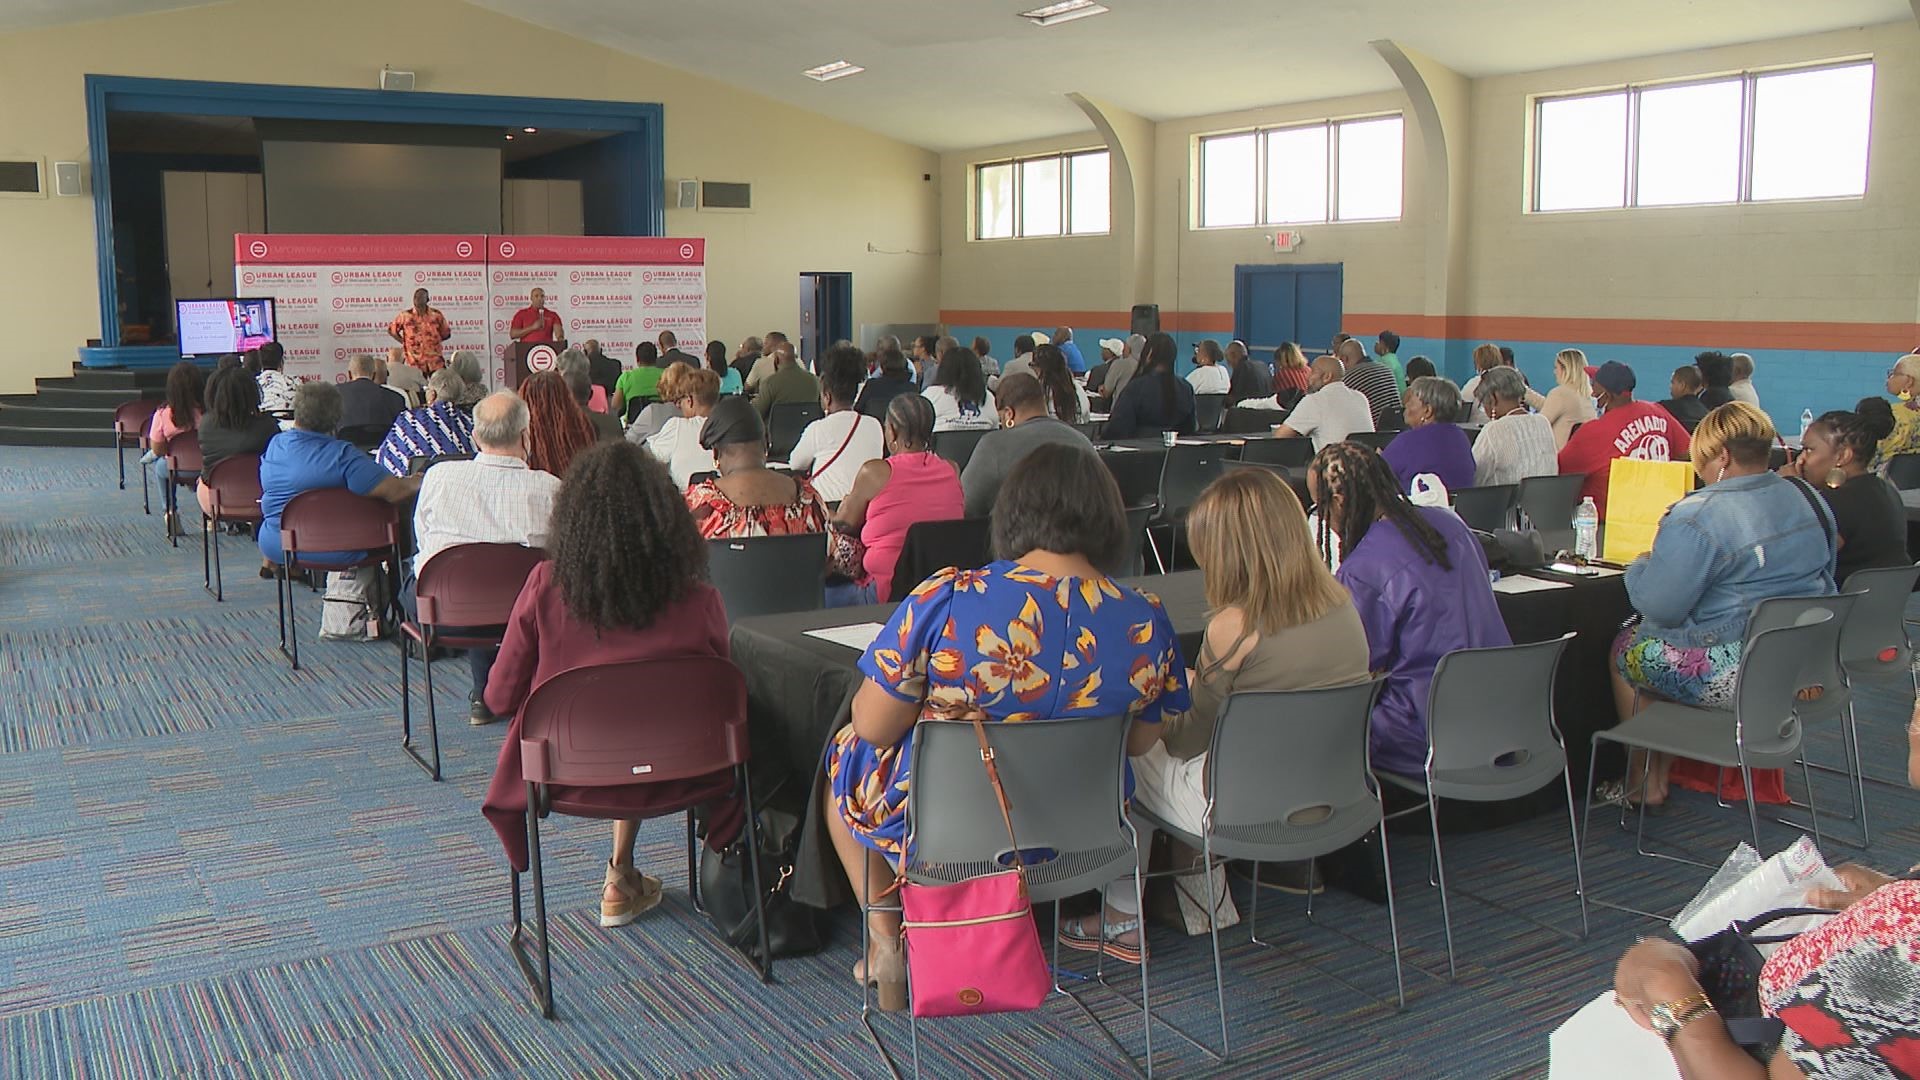 St. Louis Mayor Tishaura Jones and the Urban League are asking for the community's help in addressing violence. Jones hosted an event discussing what can be done.